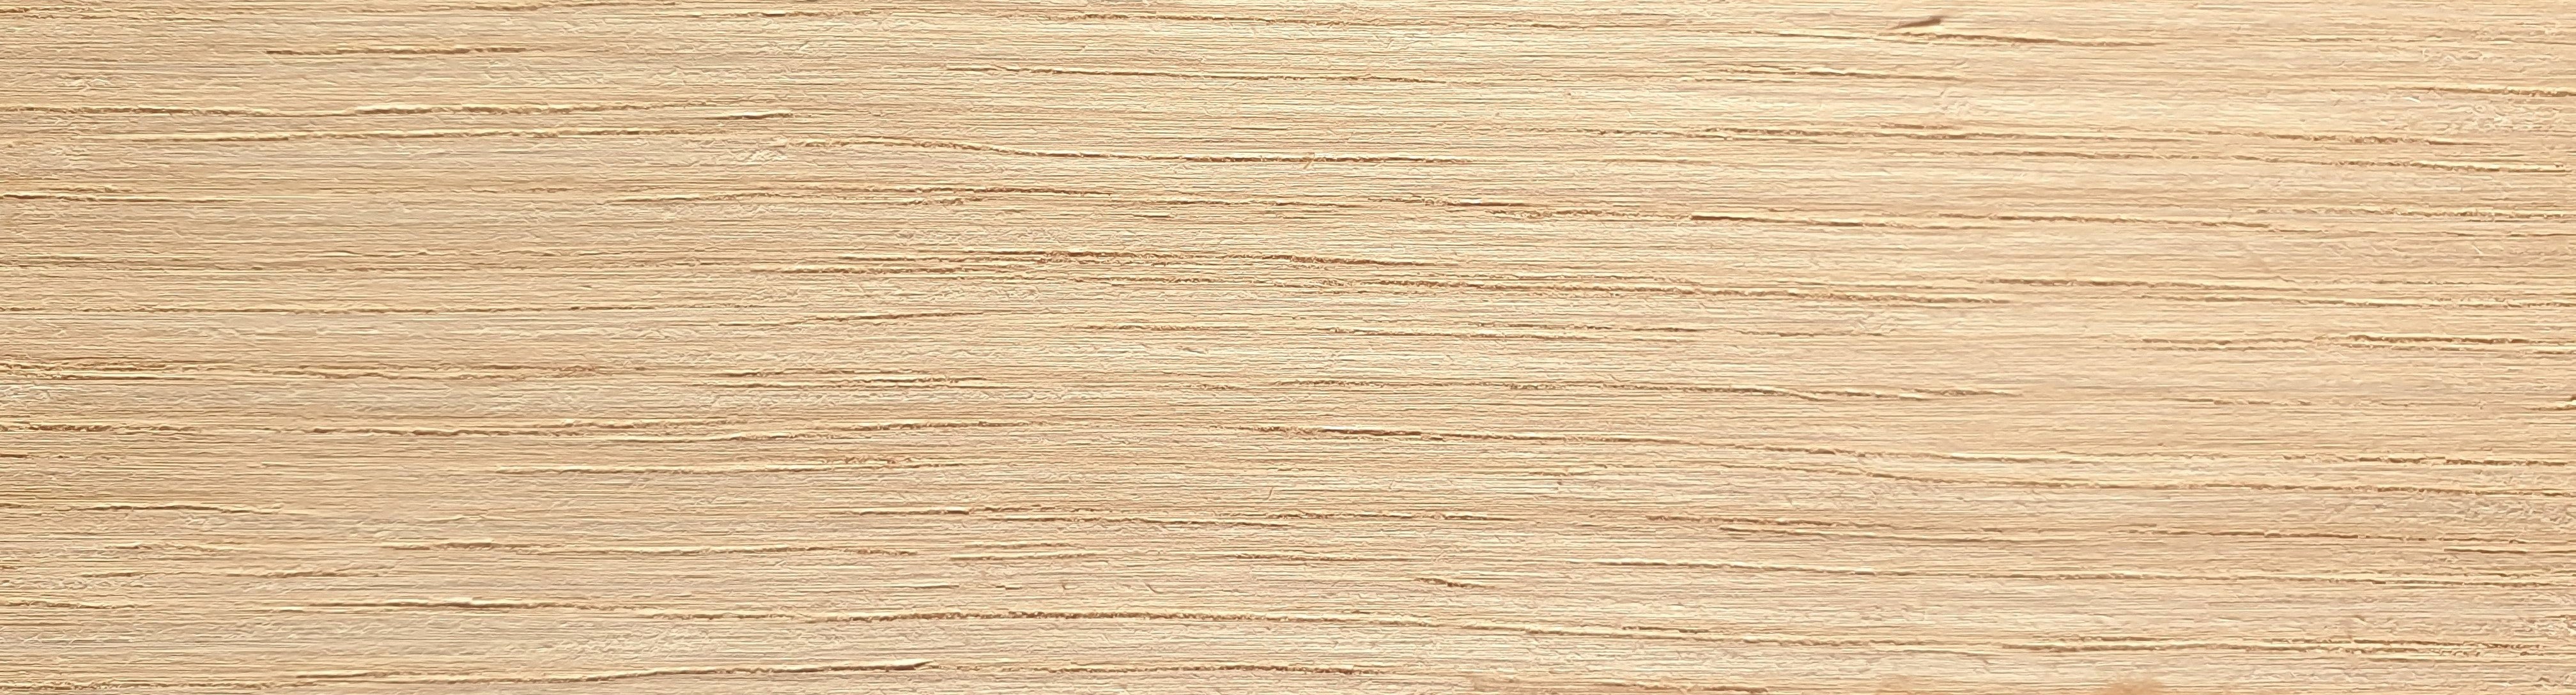 American White Oak Thickwood Unglued Edging / Lipping 1mm Thick Oak Wood Edging: Various Widths